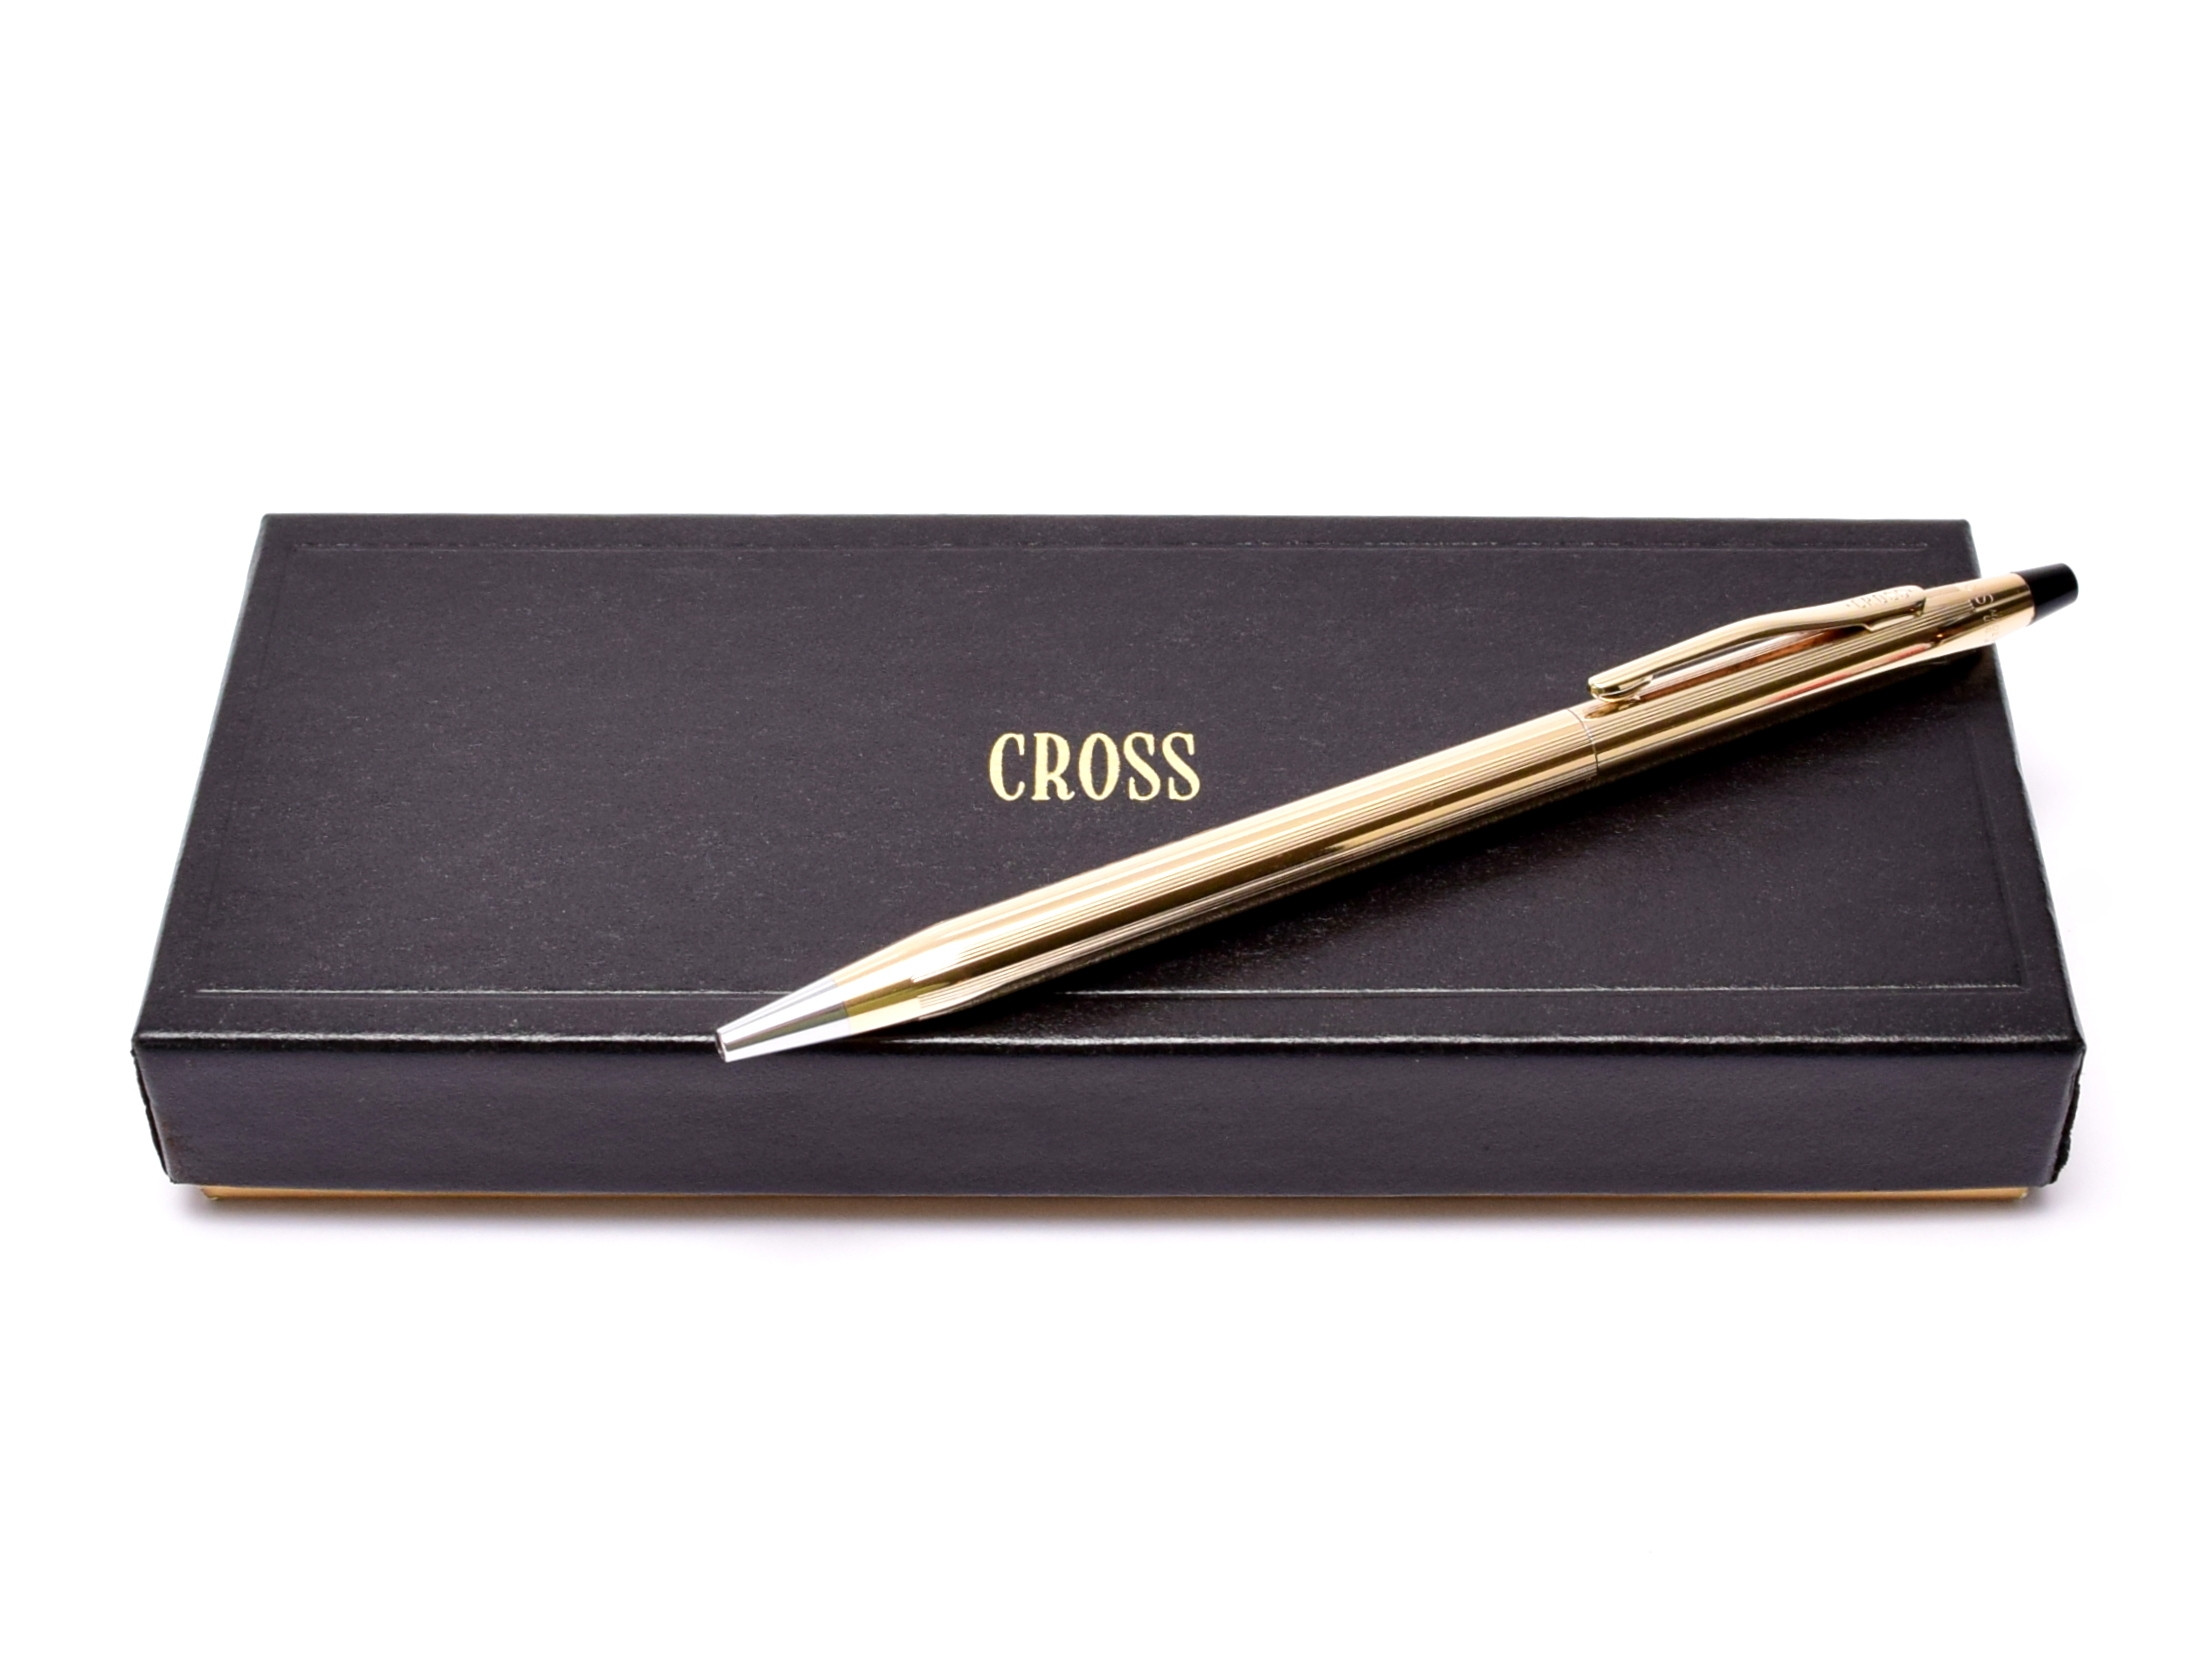 Cross Pen Vintage 12 Kt Yellow Gold Filled Soft Tip Pen In Box USA new vintage 